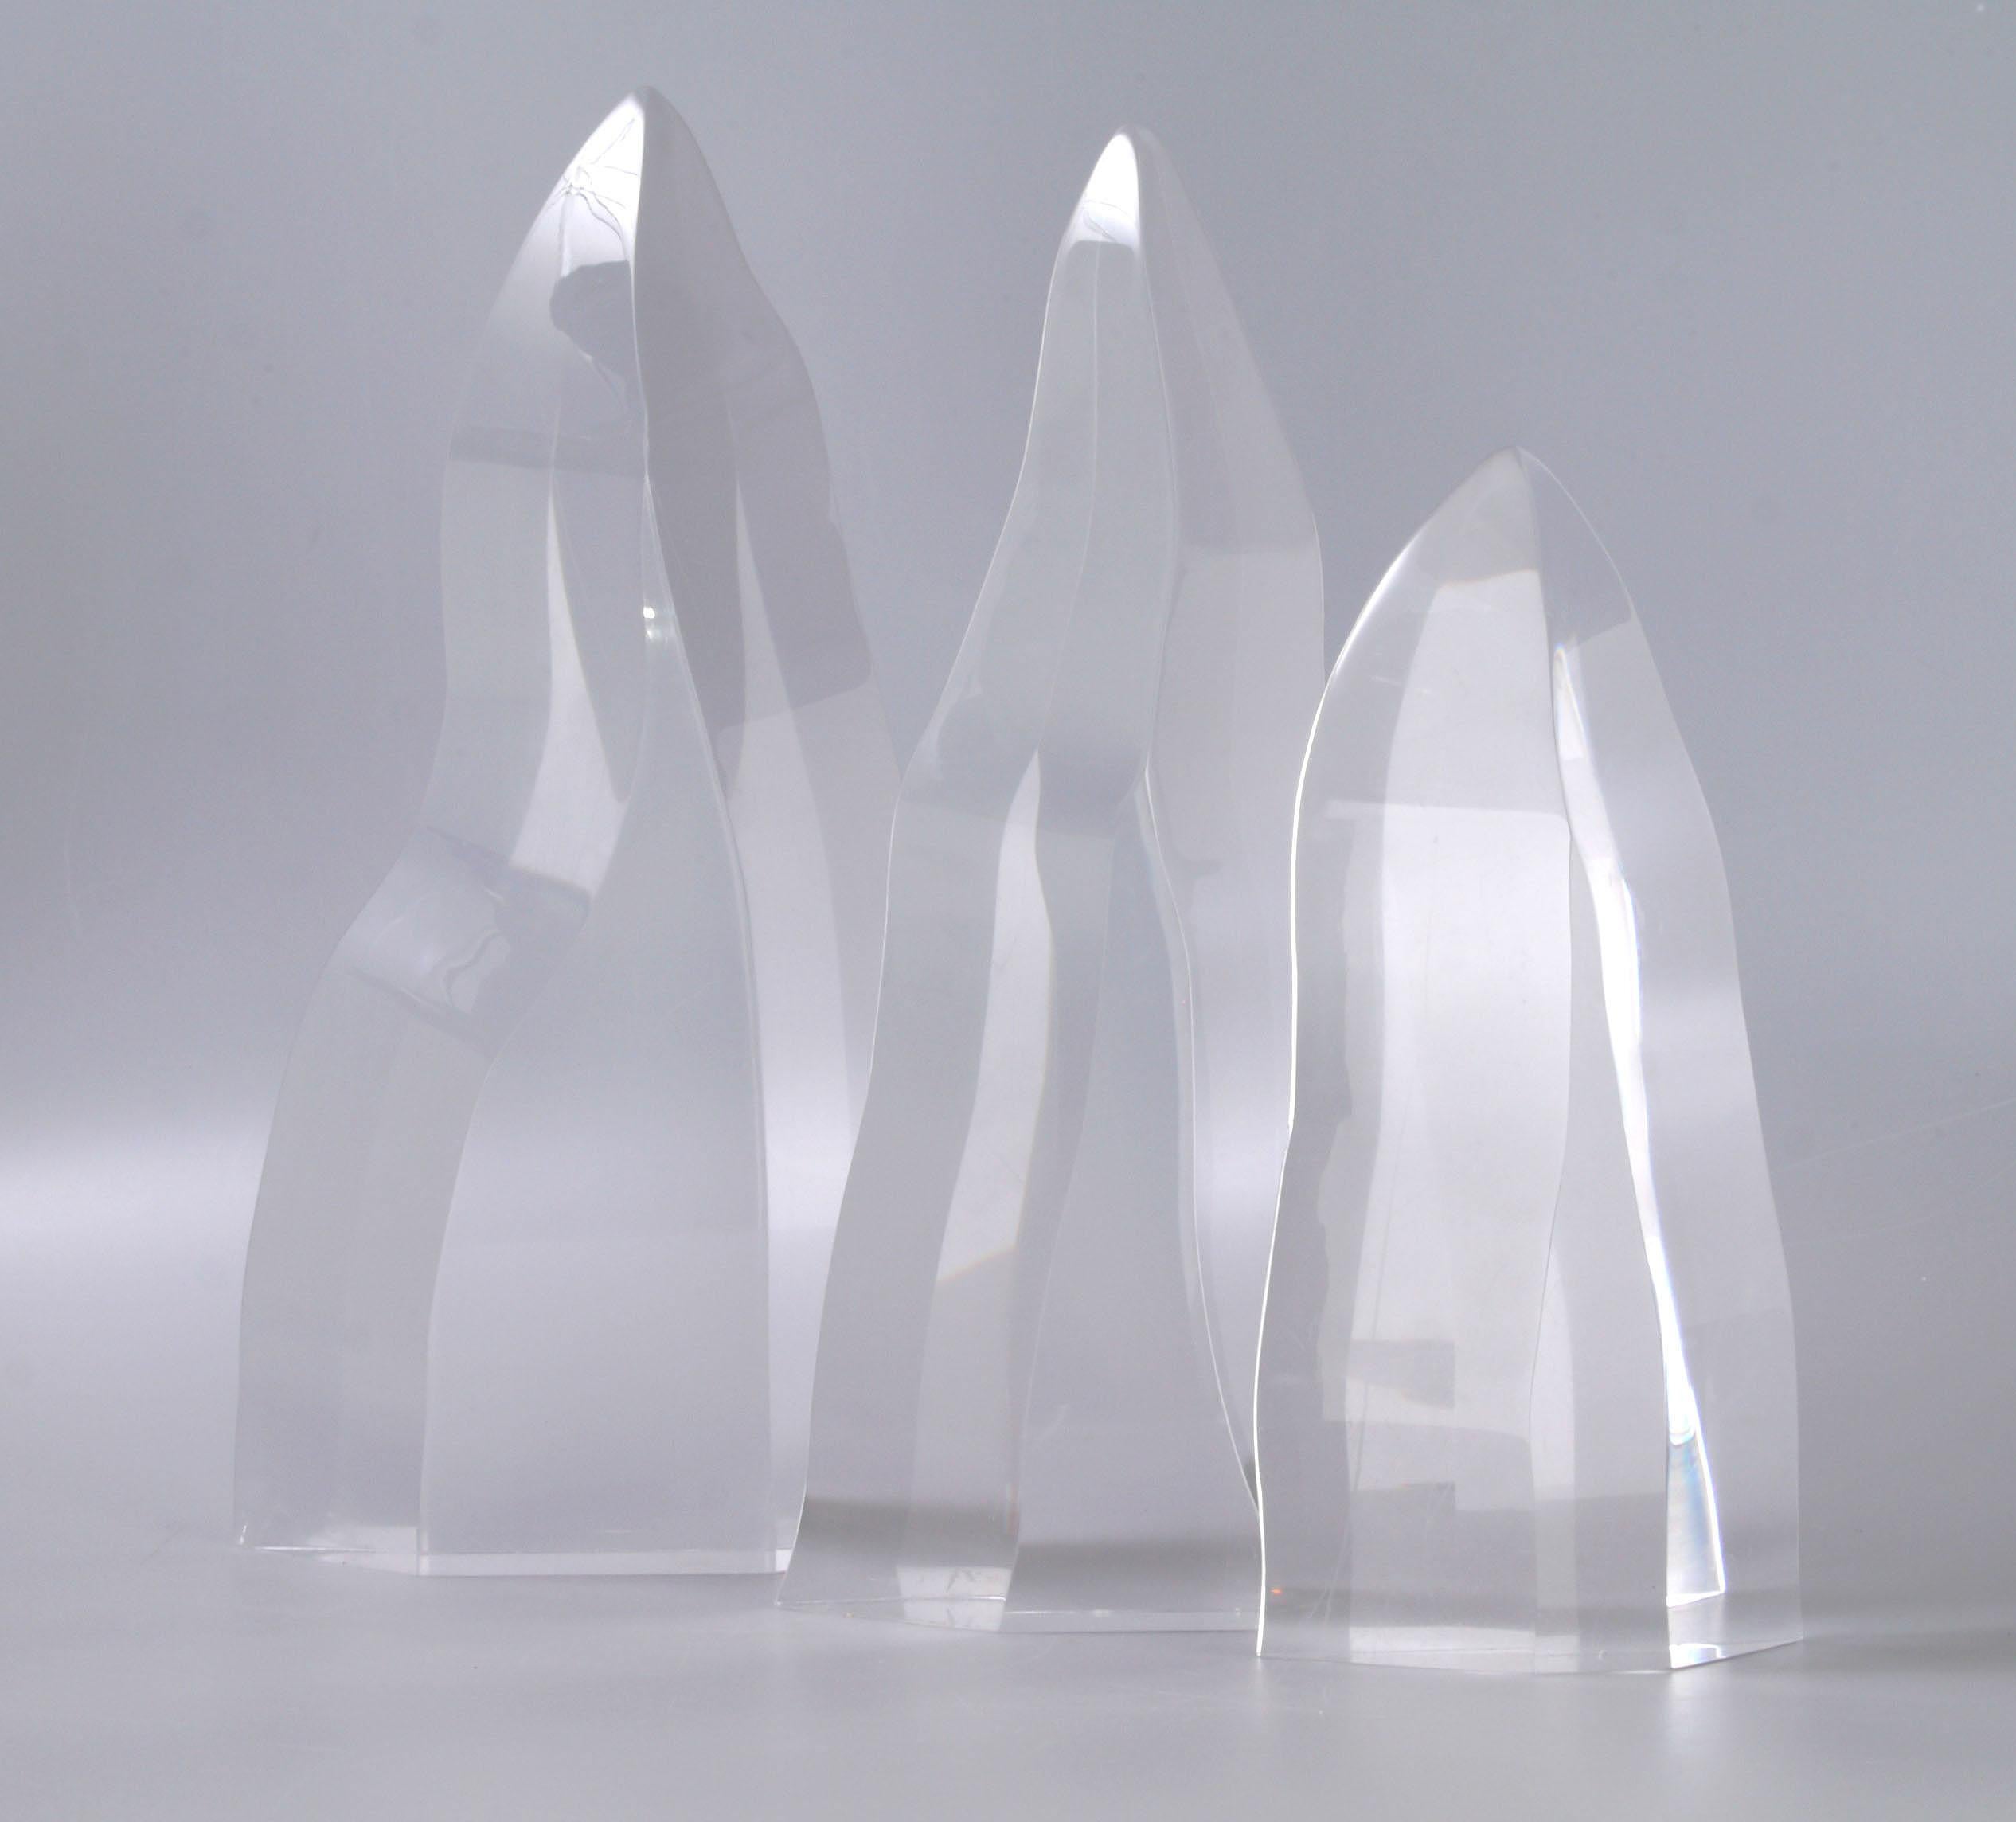 Set of three Mid-Century Modern Lucite iceberg sculptures in graduated sizes. 
Large, 7.25 inches L x 2 inches W x 14.5 inches H. 
Medium, 6.5 inches L x 2 inches W x 13.5 inches H. 
Small, 4.75 inches L x 2 inches W x 10 inches H. 
Recently